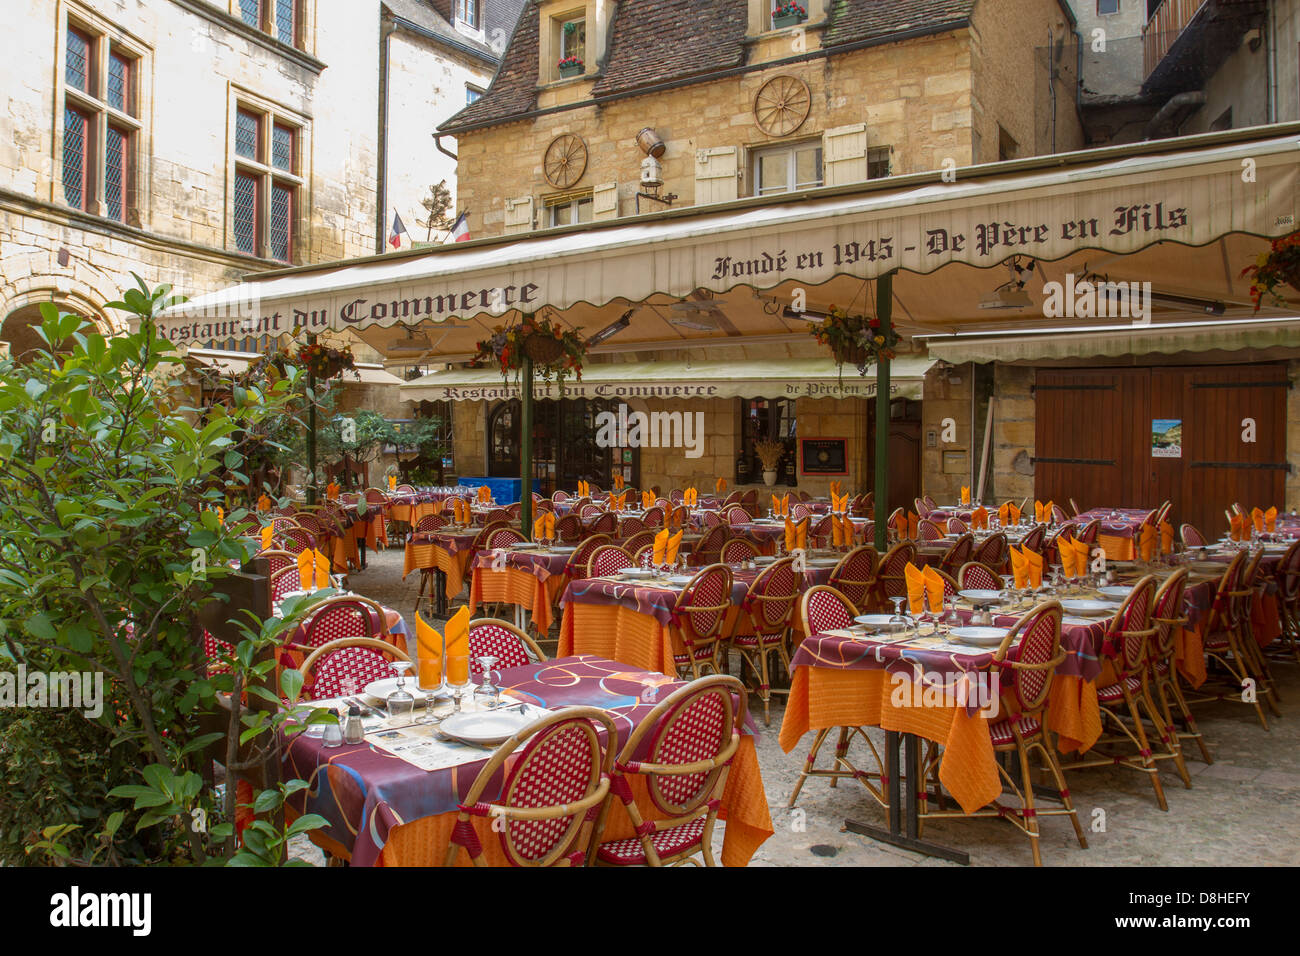 Outdoor courtyard cafe restaurant among medieval sandstone buildings in charming Sarlat, Dordogne region of France Stock Photo